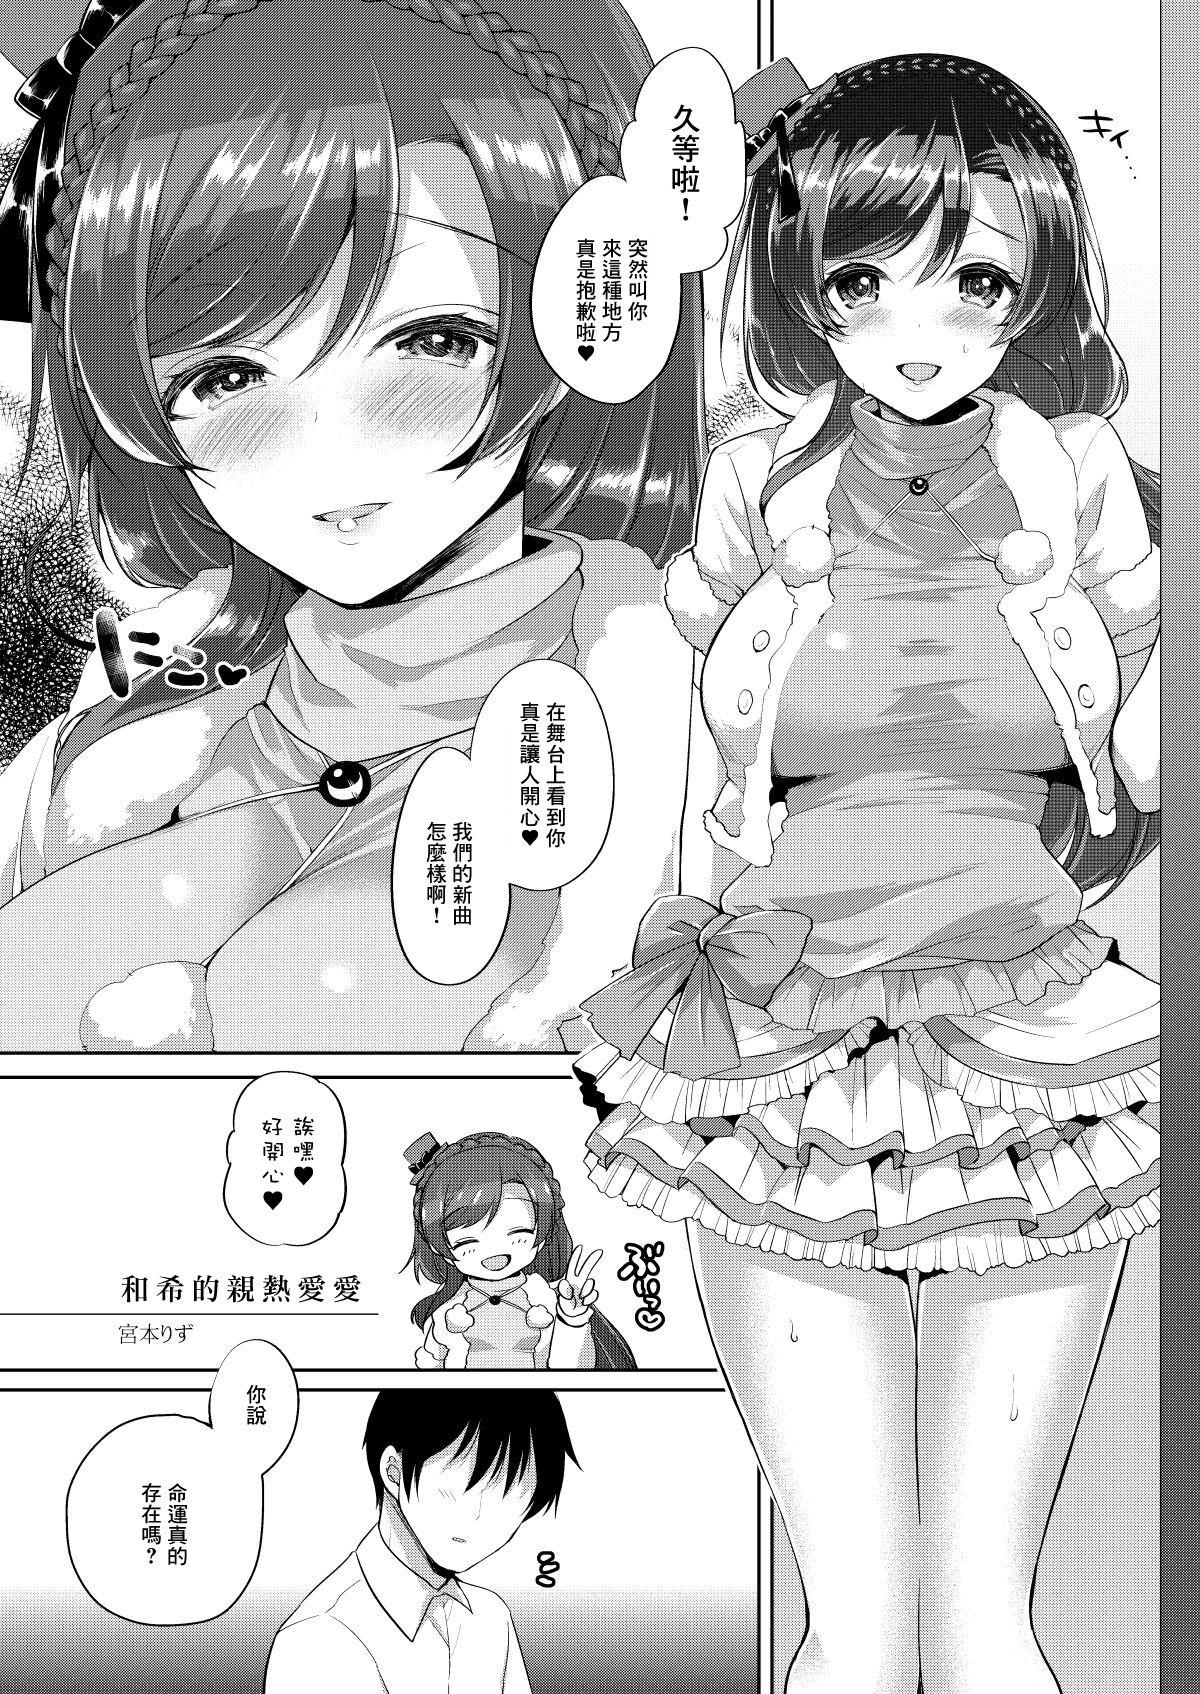 Tits 希といちゃラブエッチ - Love live Gay Clinic - Page 1